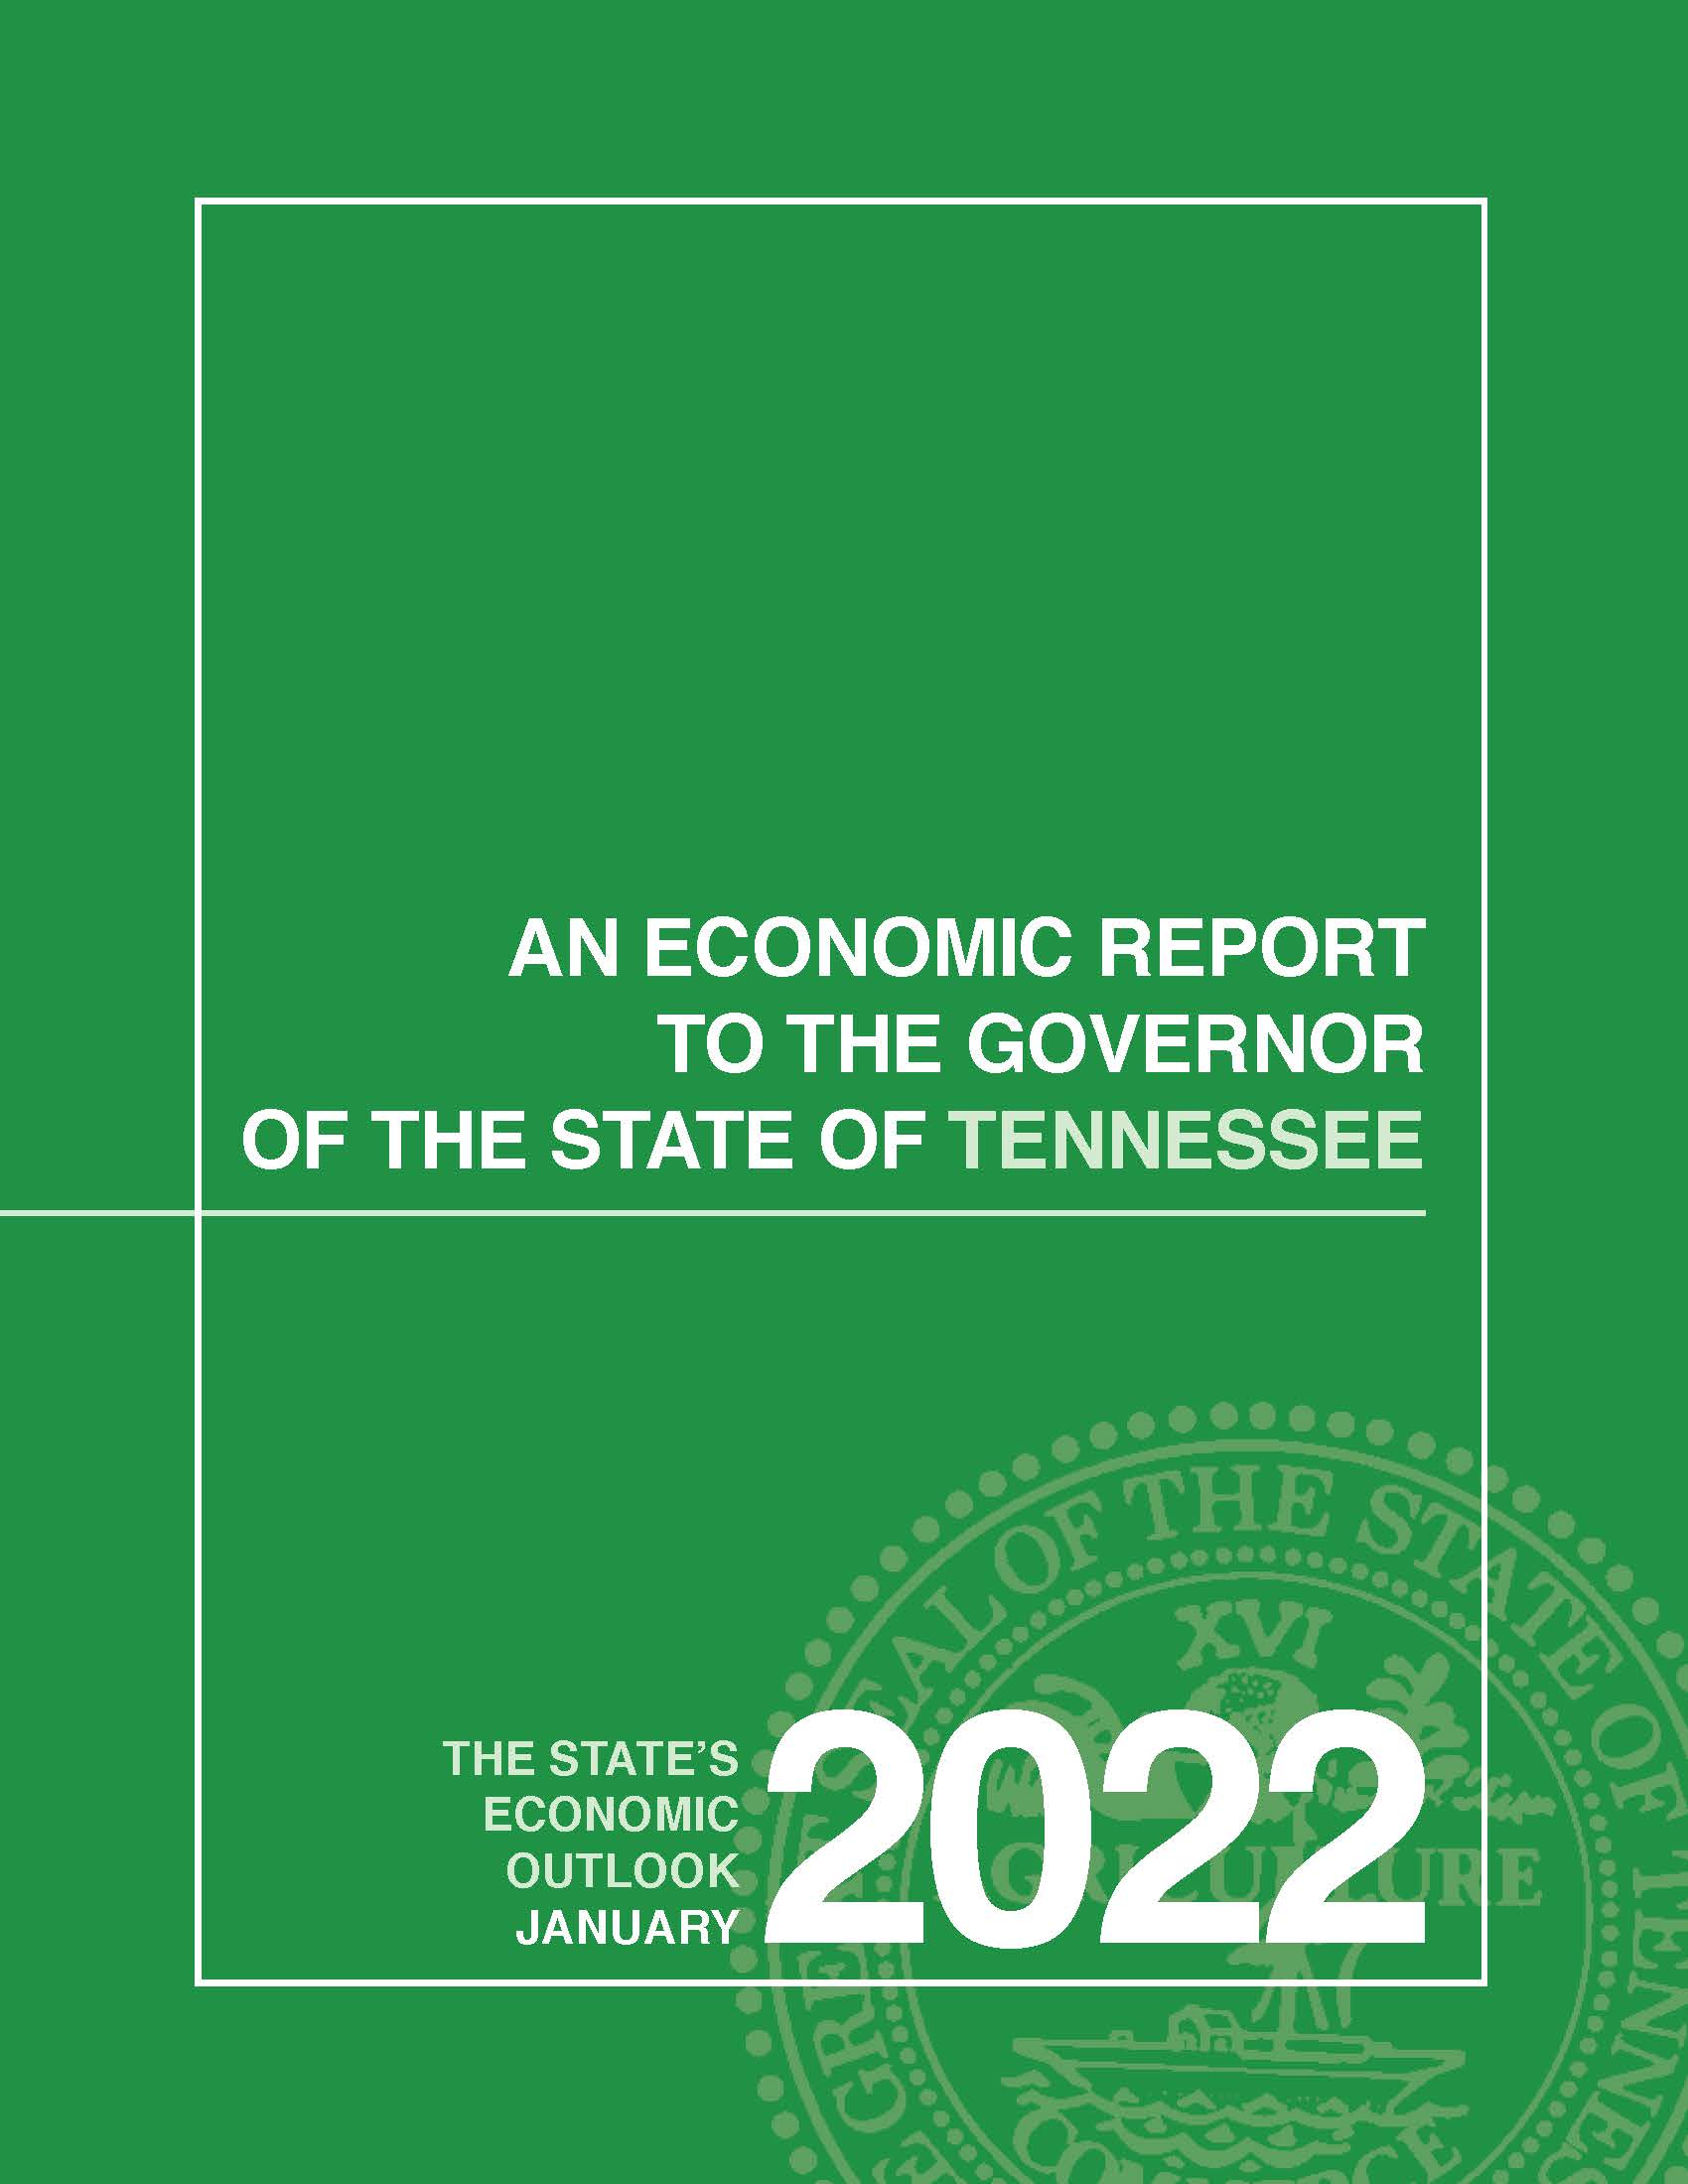 An Economic Report to the Governor of the State of Tennessee, 2022